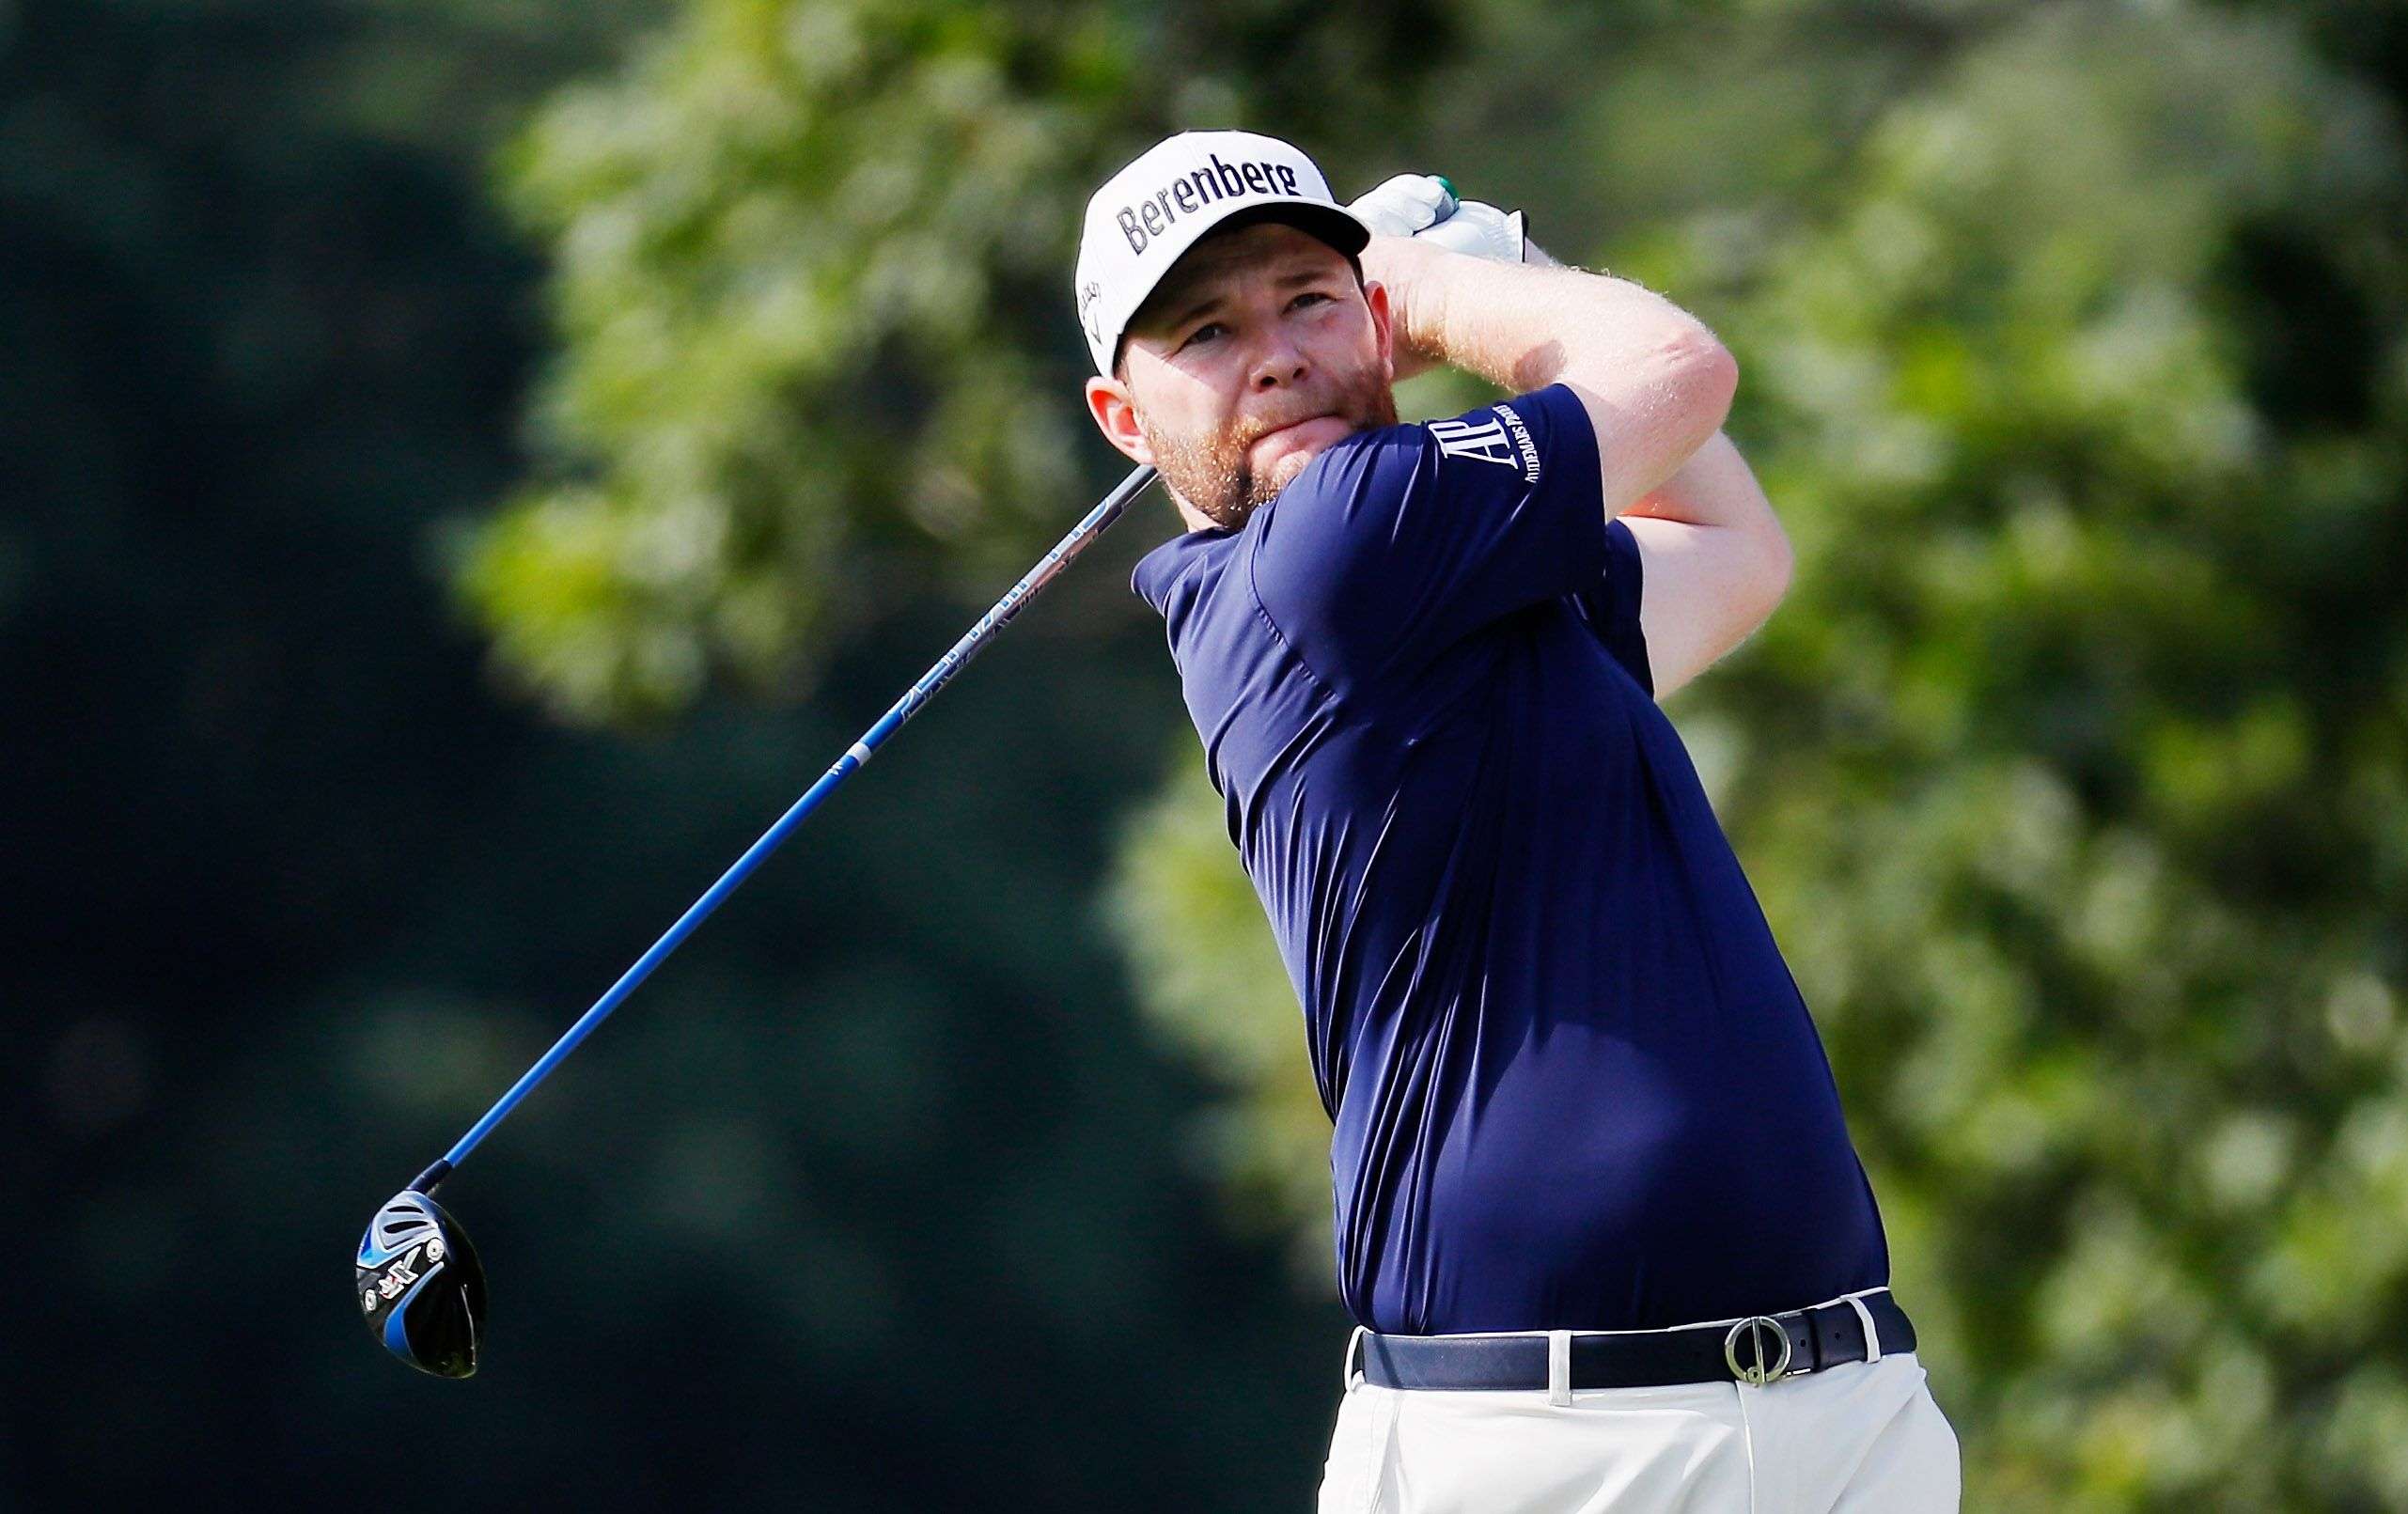 Branden Grace will make his first appearance at the Venetian Macao Open in October. Photo: AFP